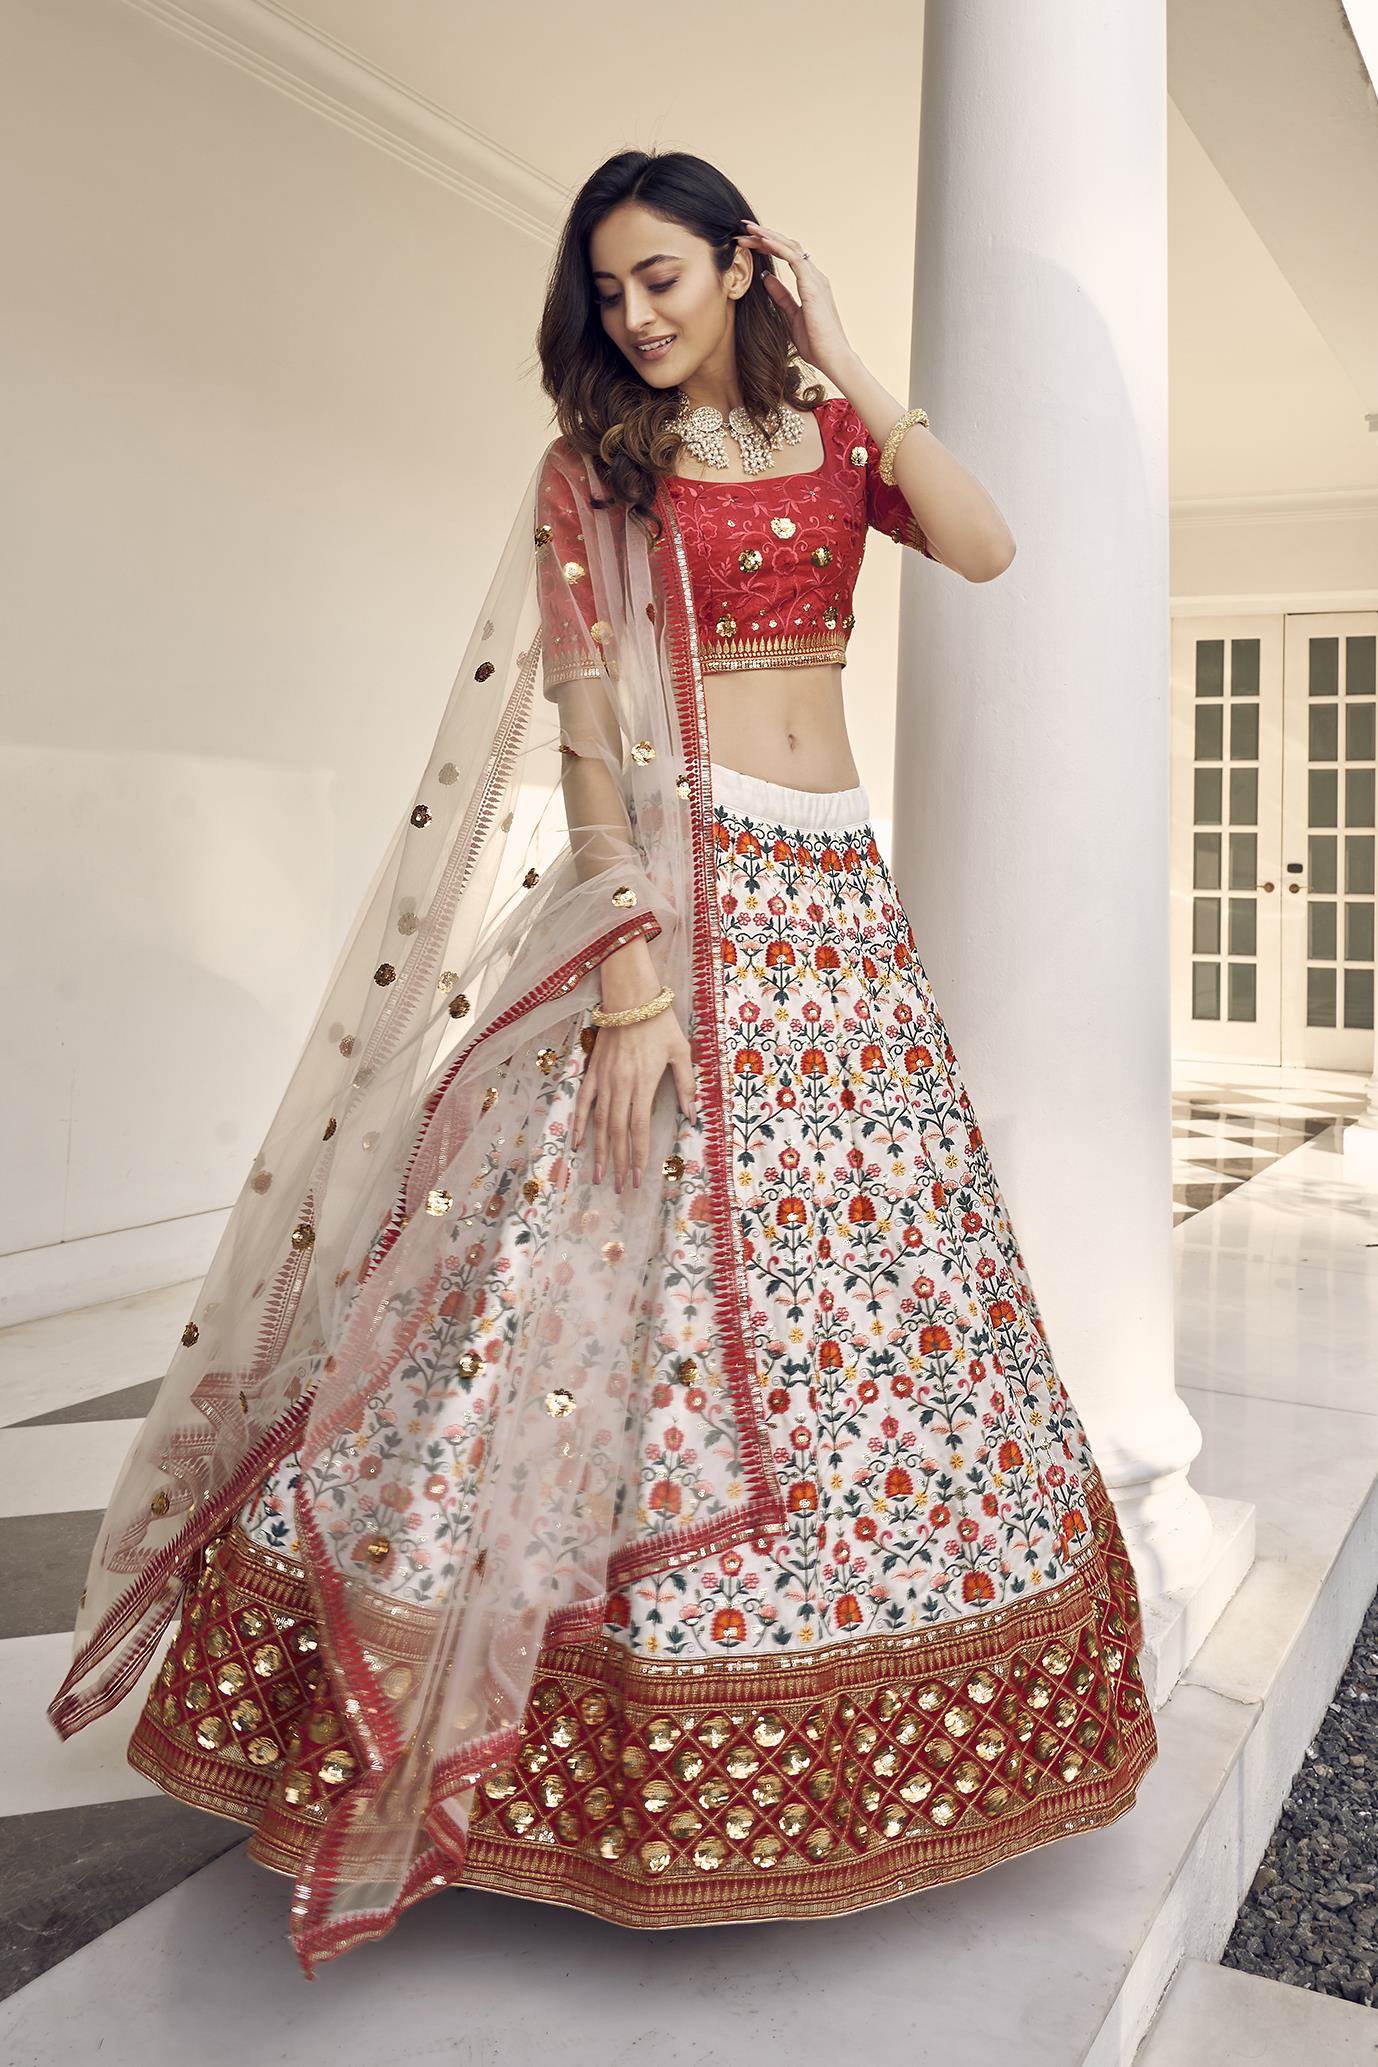 If you're thinking of something different at the wedding, try this red and white  lehenga | NewsTrack English 1